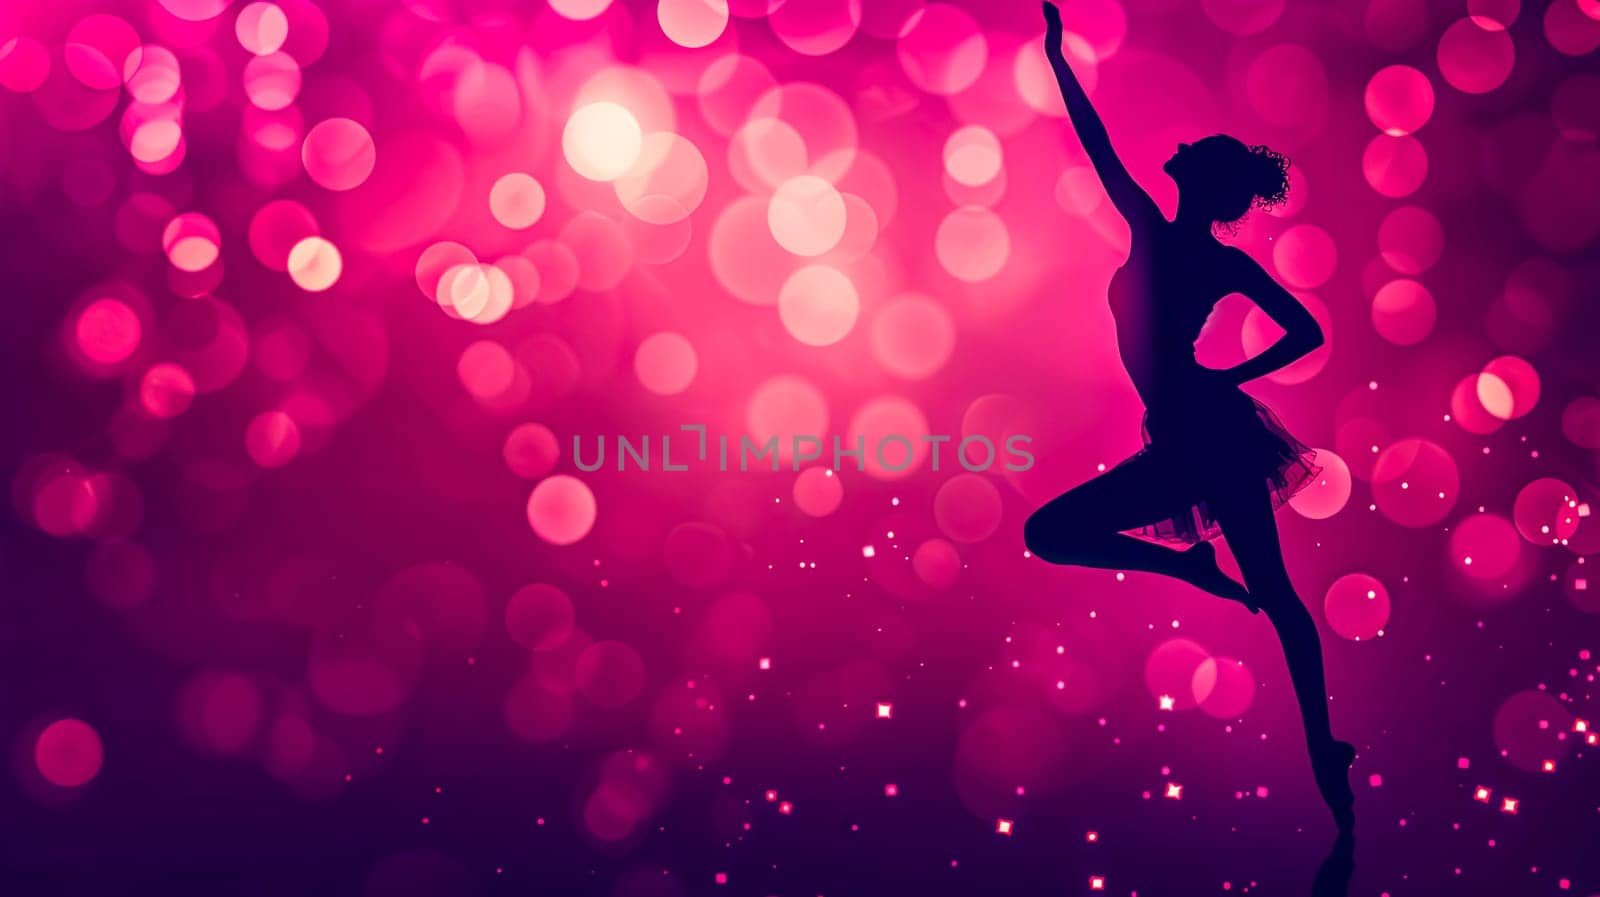 A silhouette of a ballerina dancing on a pink and purple background, copy space by Edophoto